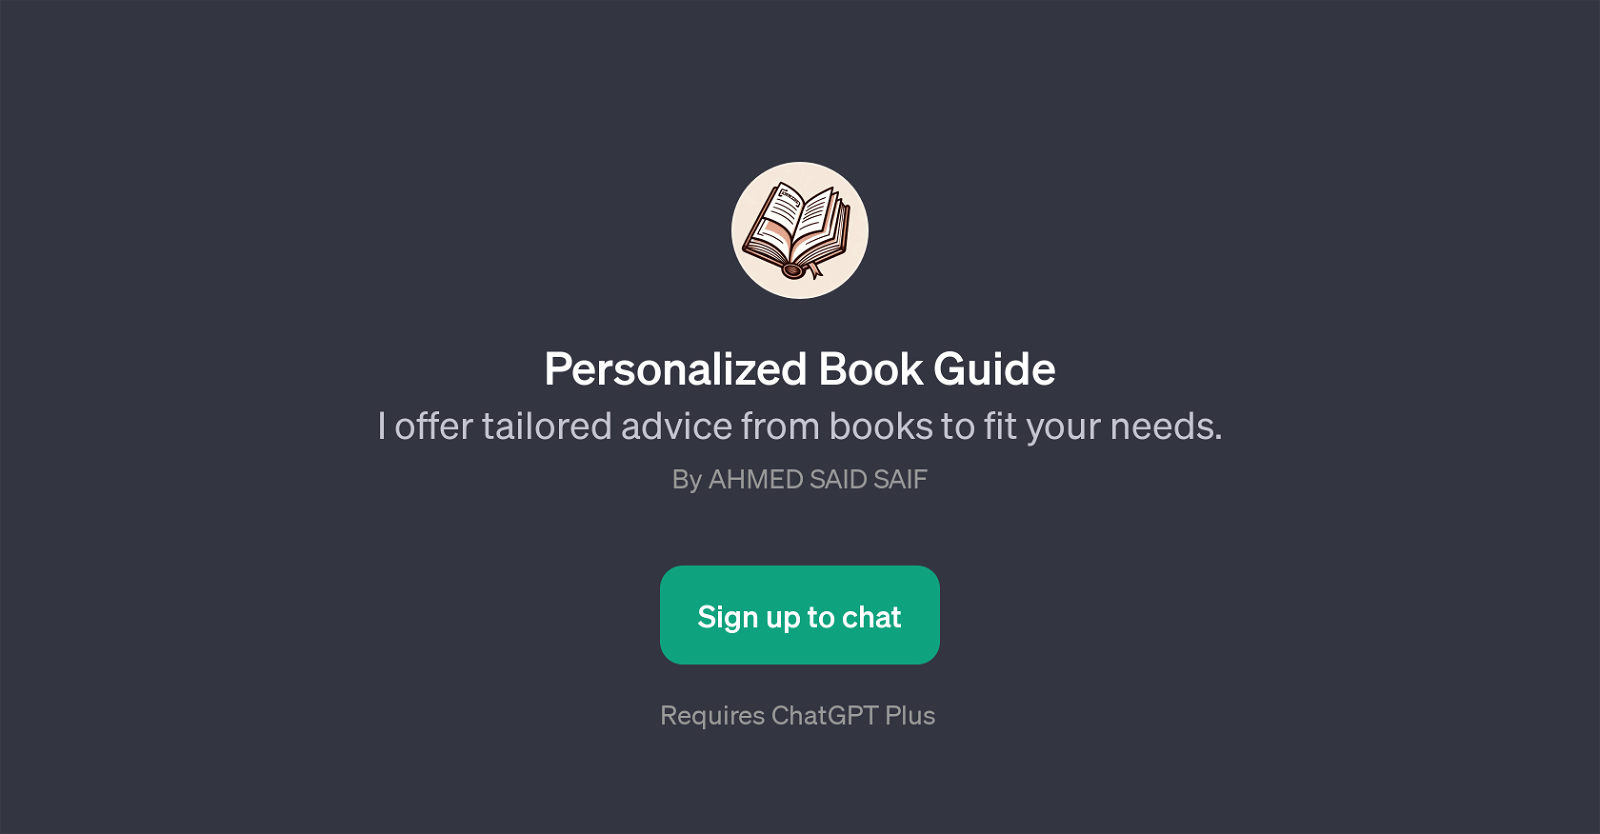 Personalized Book Guide website